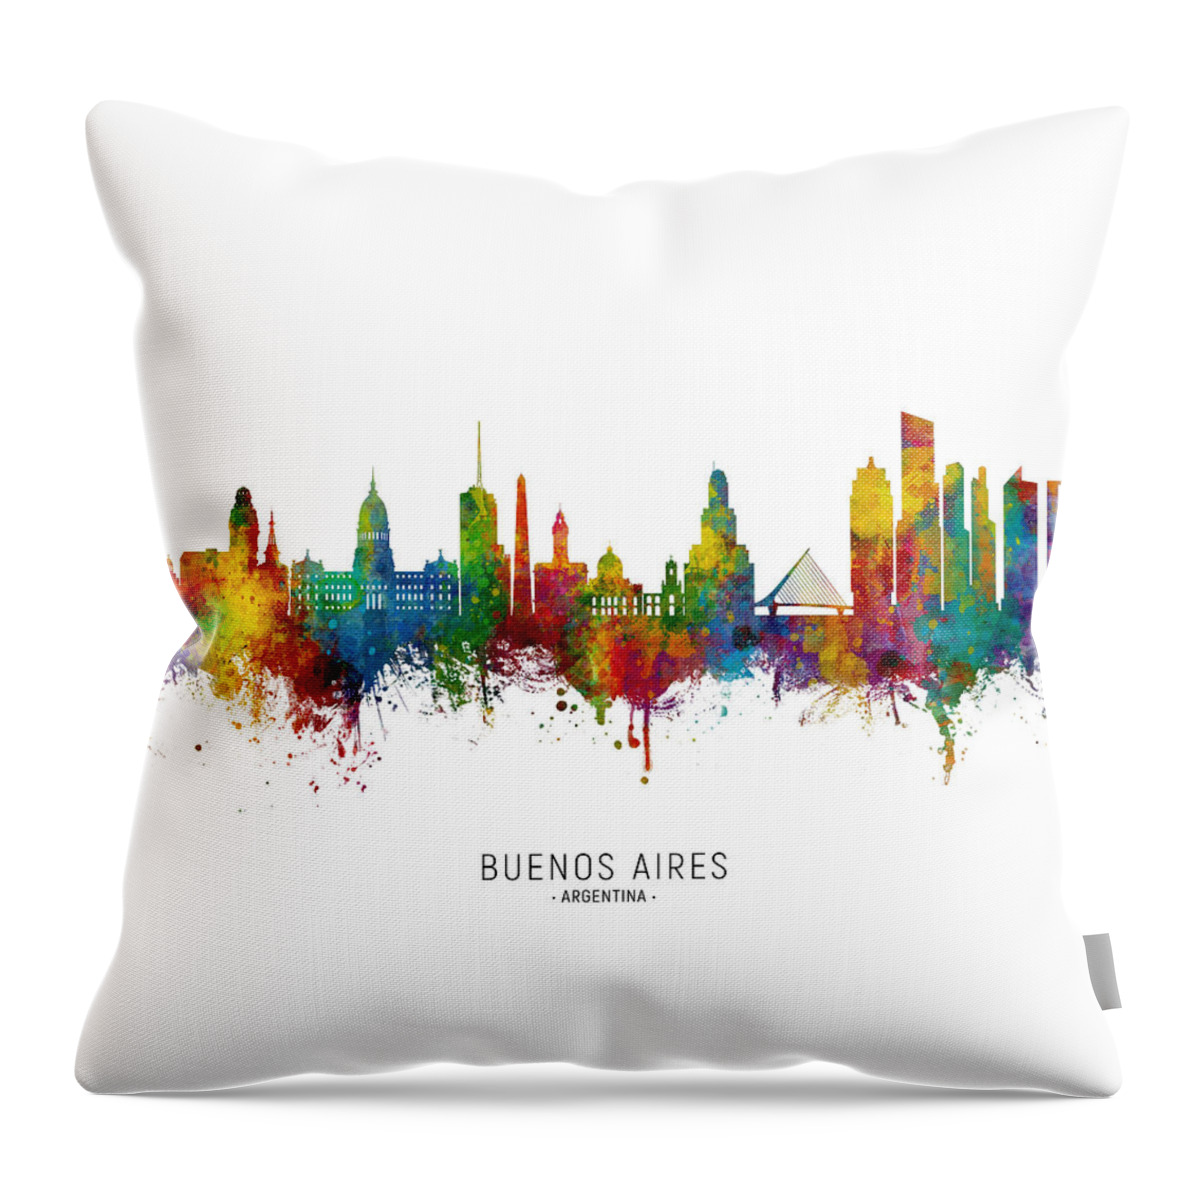 Buenos Aires Throw Pillow featuring the digital art Buenos Aires Argentina Skyline by Michael Tompsett